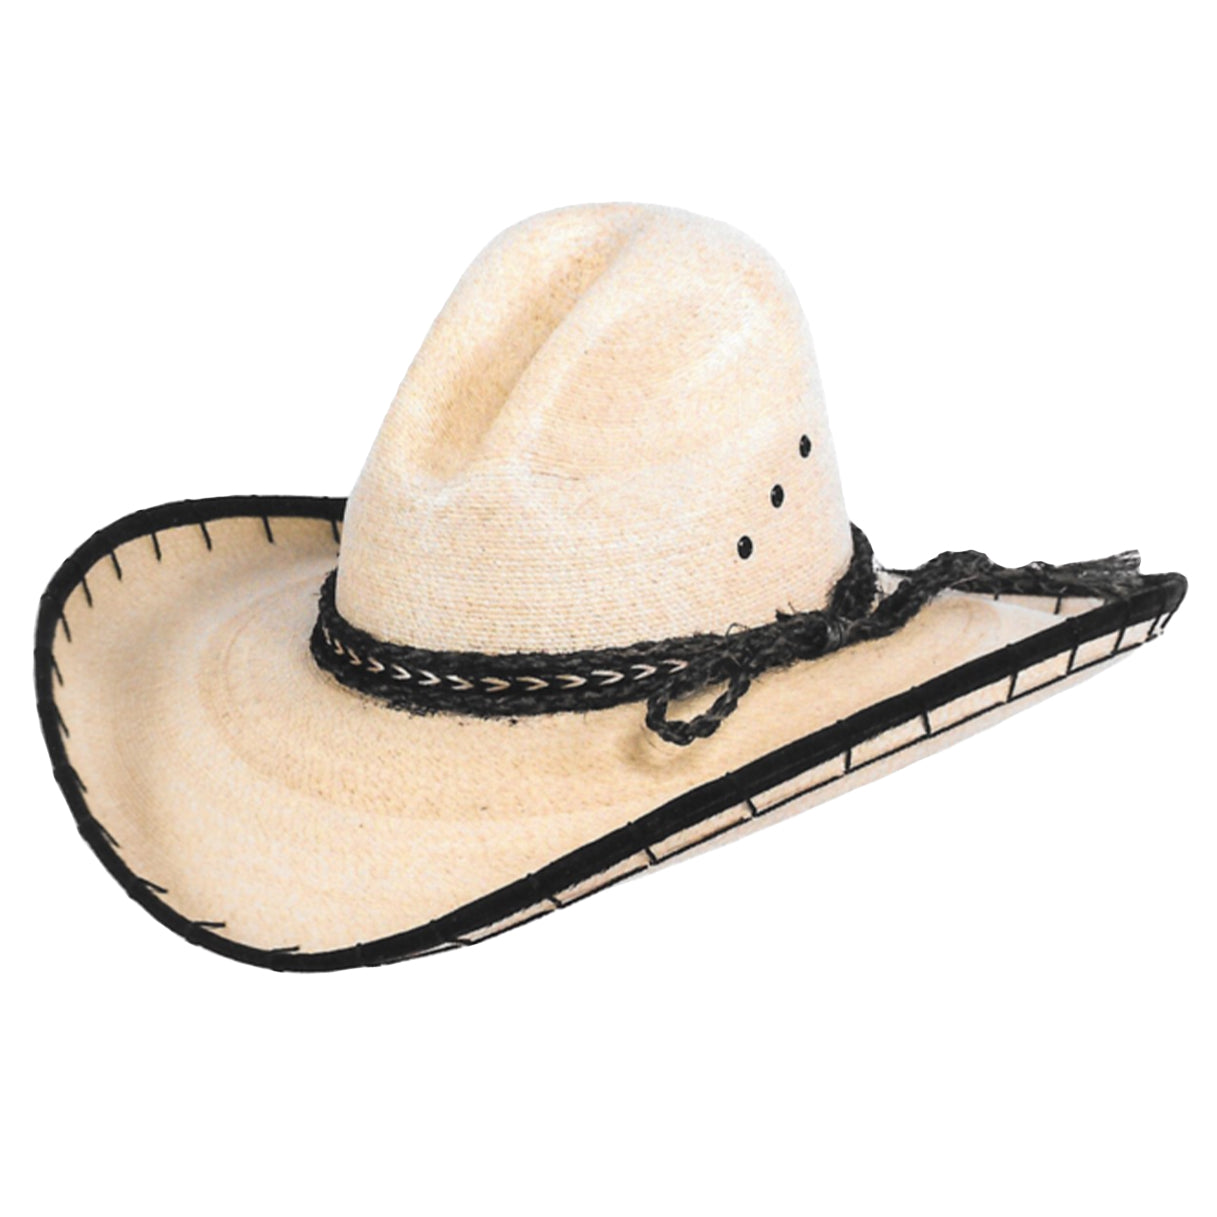 Western Cowboy Sombrero For Men And Women Stylish And Versatile Headwear  With Unique Design From Rnoq, $24.6